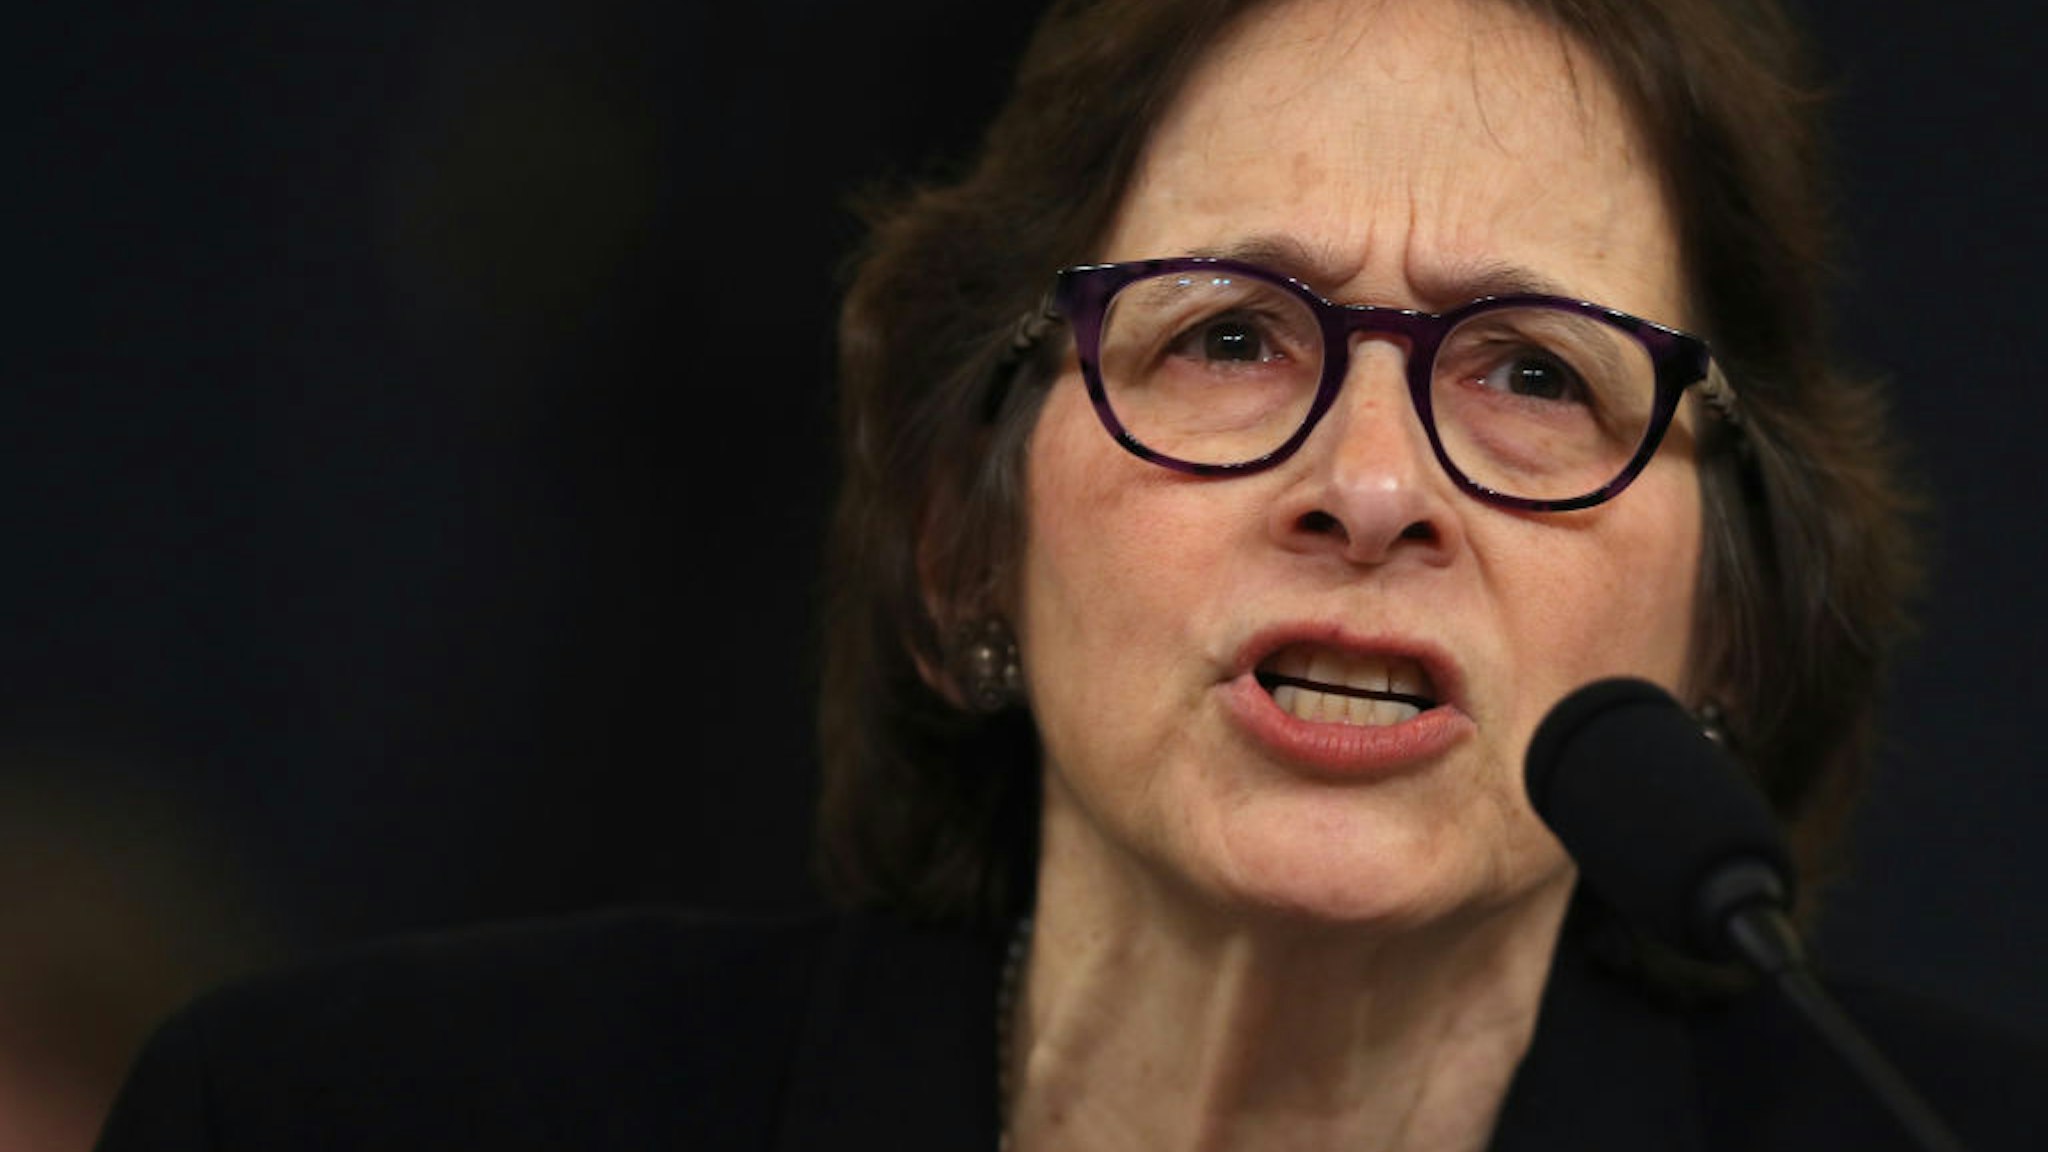 Constitutional scholar Pamela Karlan of Stanford University testifies before the House Judiciary Committee in the Longworth House Office Building on Capitol Hill December 4, 2019 in Washington, DC.